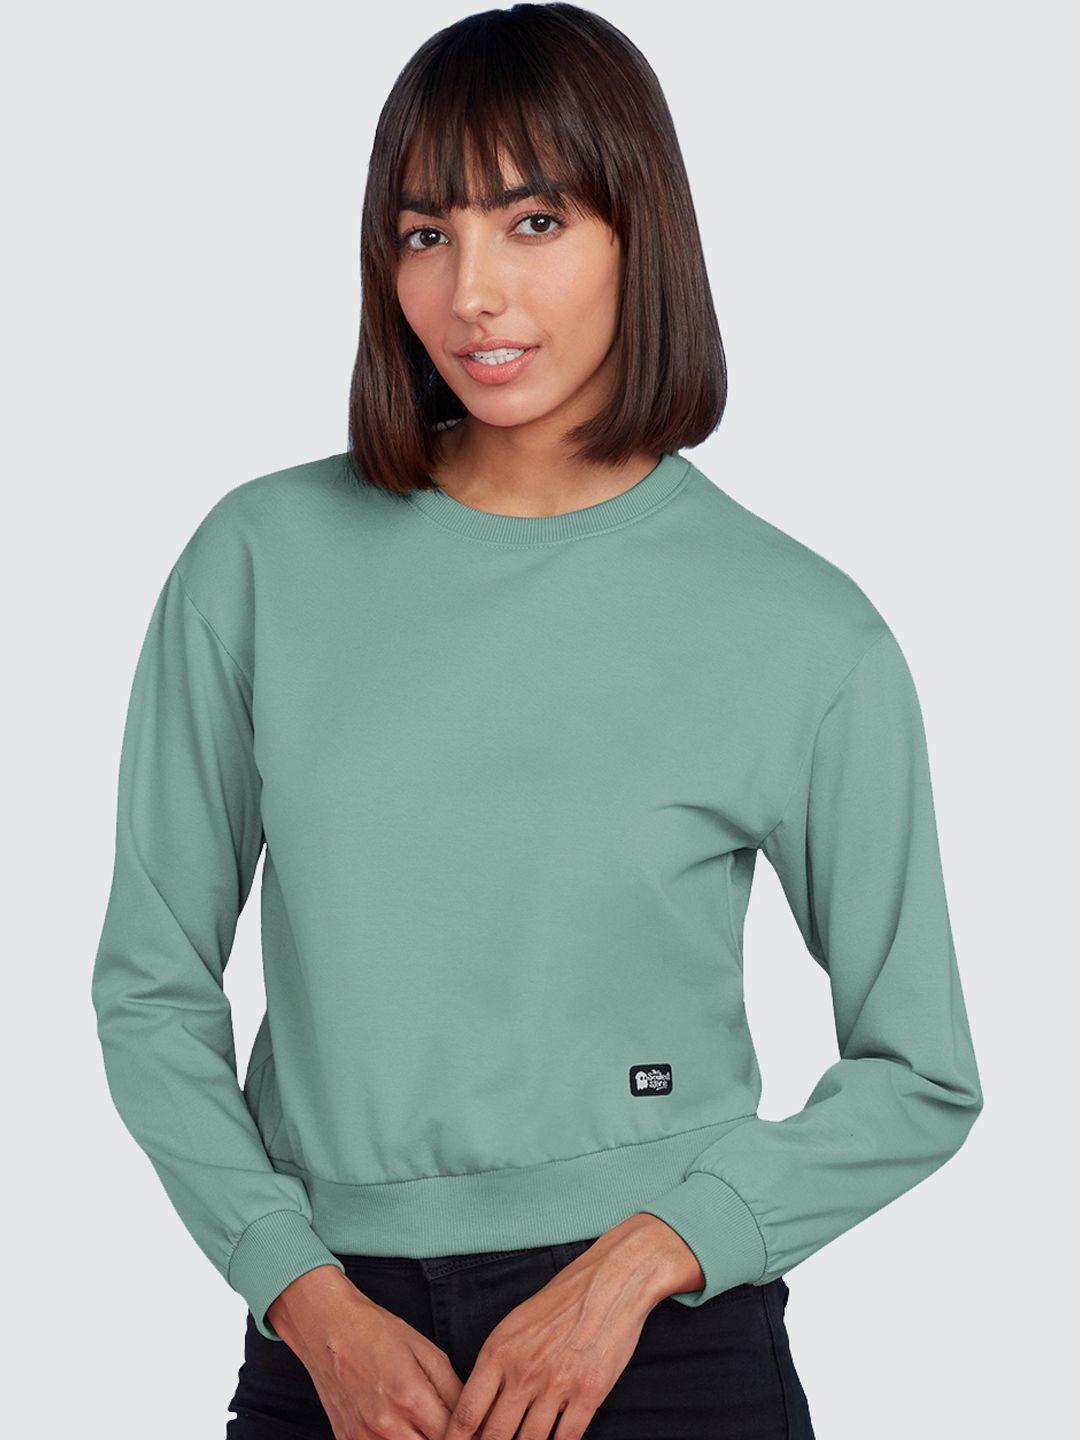 the souled store women sage green solid sweatshirt